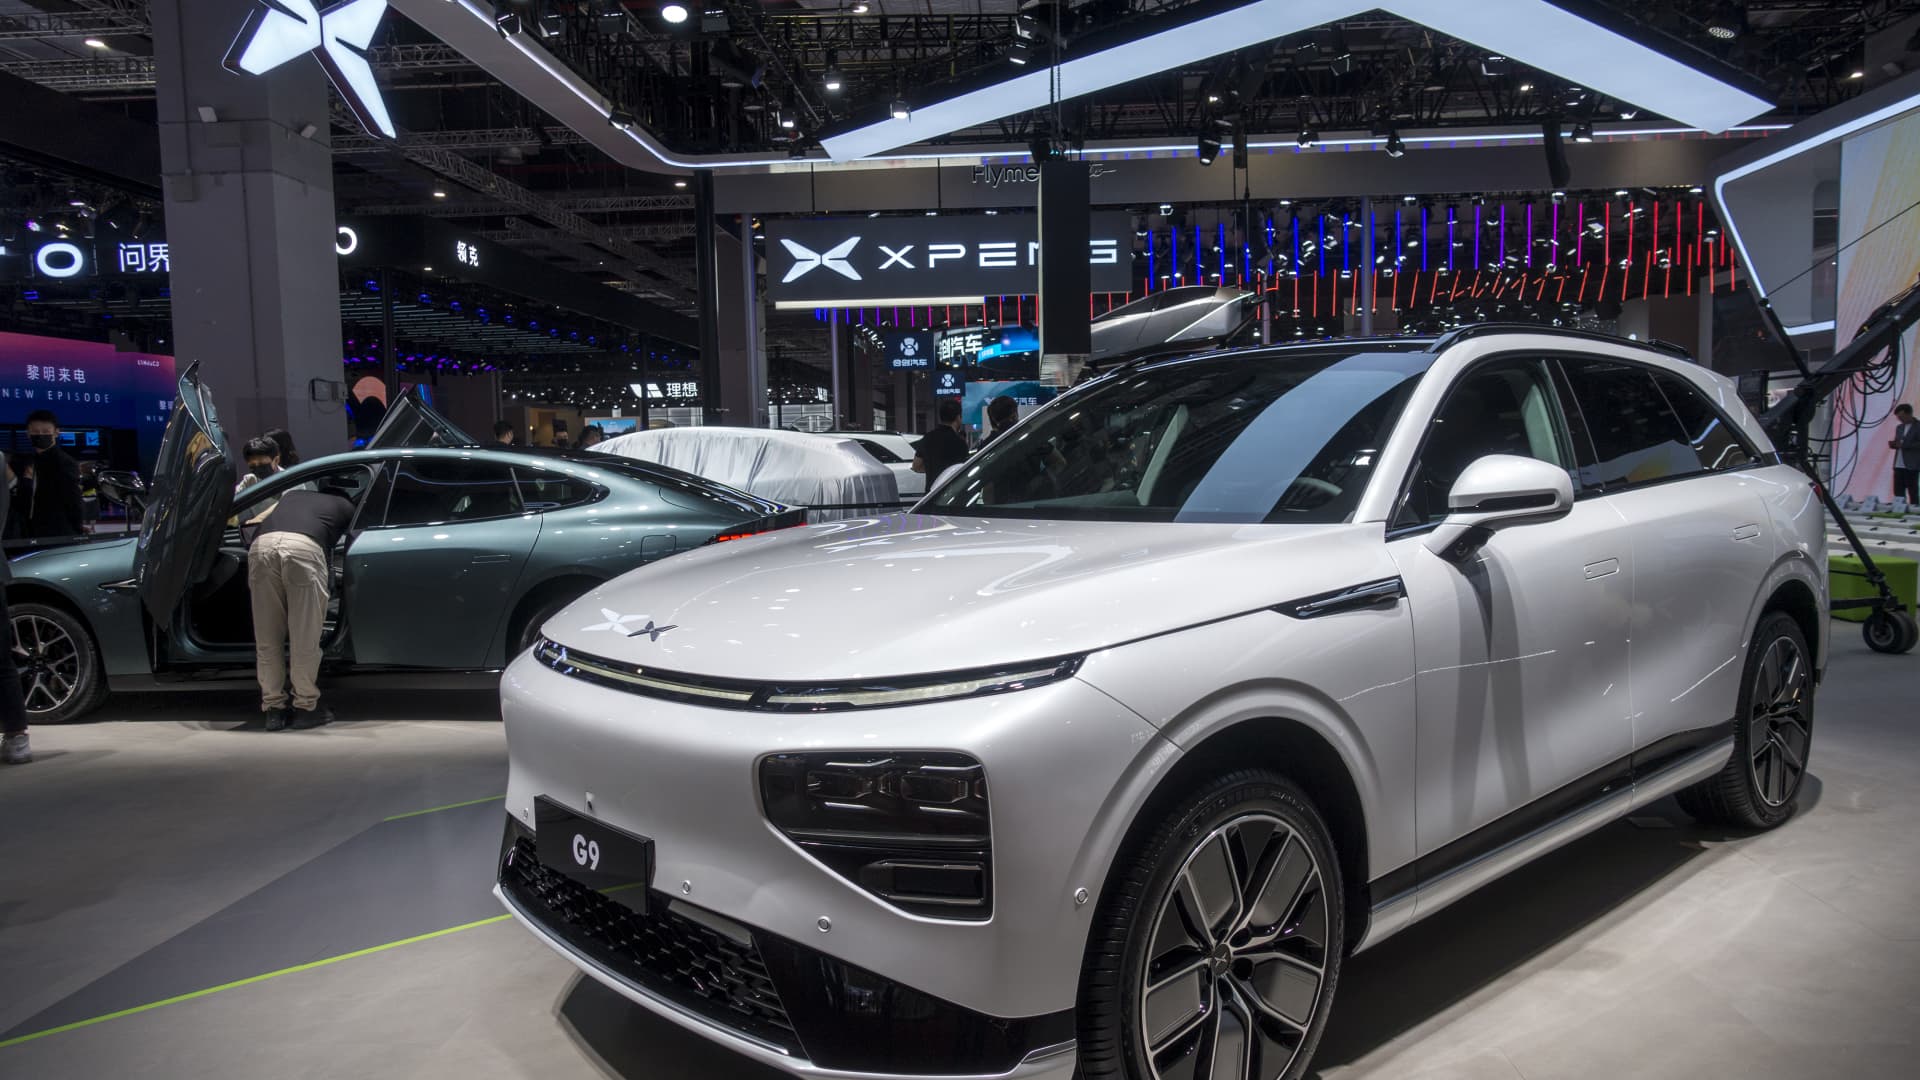 Xpeng plans to hire 4,000 people, invest in AI as CEO warns intense EV rivalry may end in ‘bloodbath’ Auto Recent